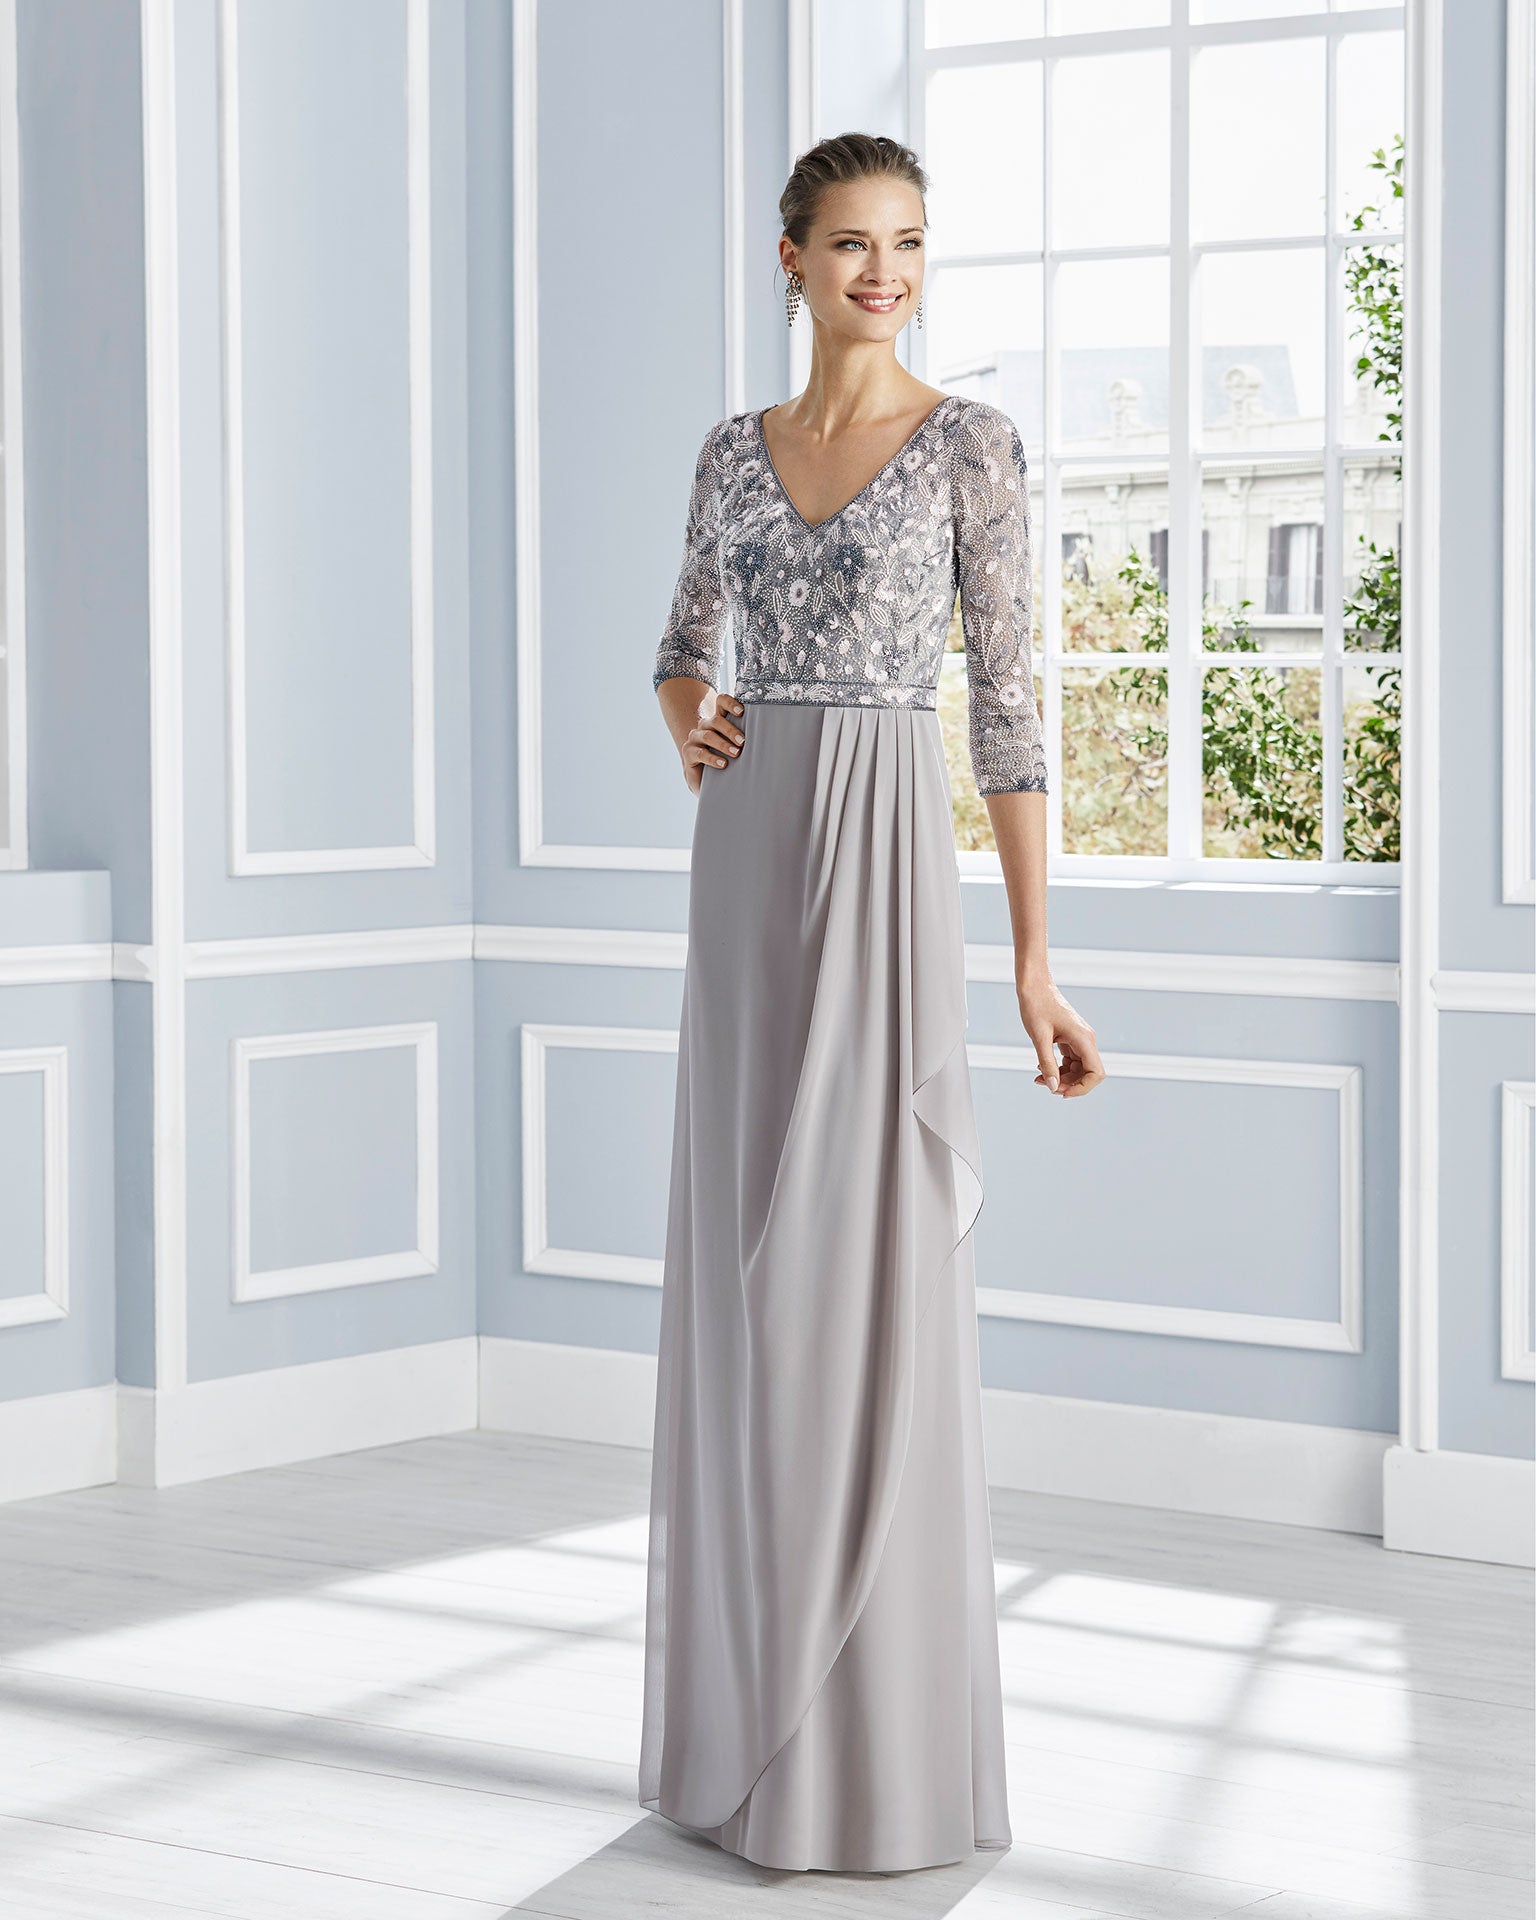 Couture Club - Gown -4G226 - Ever Elegant